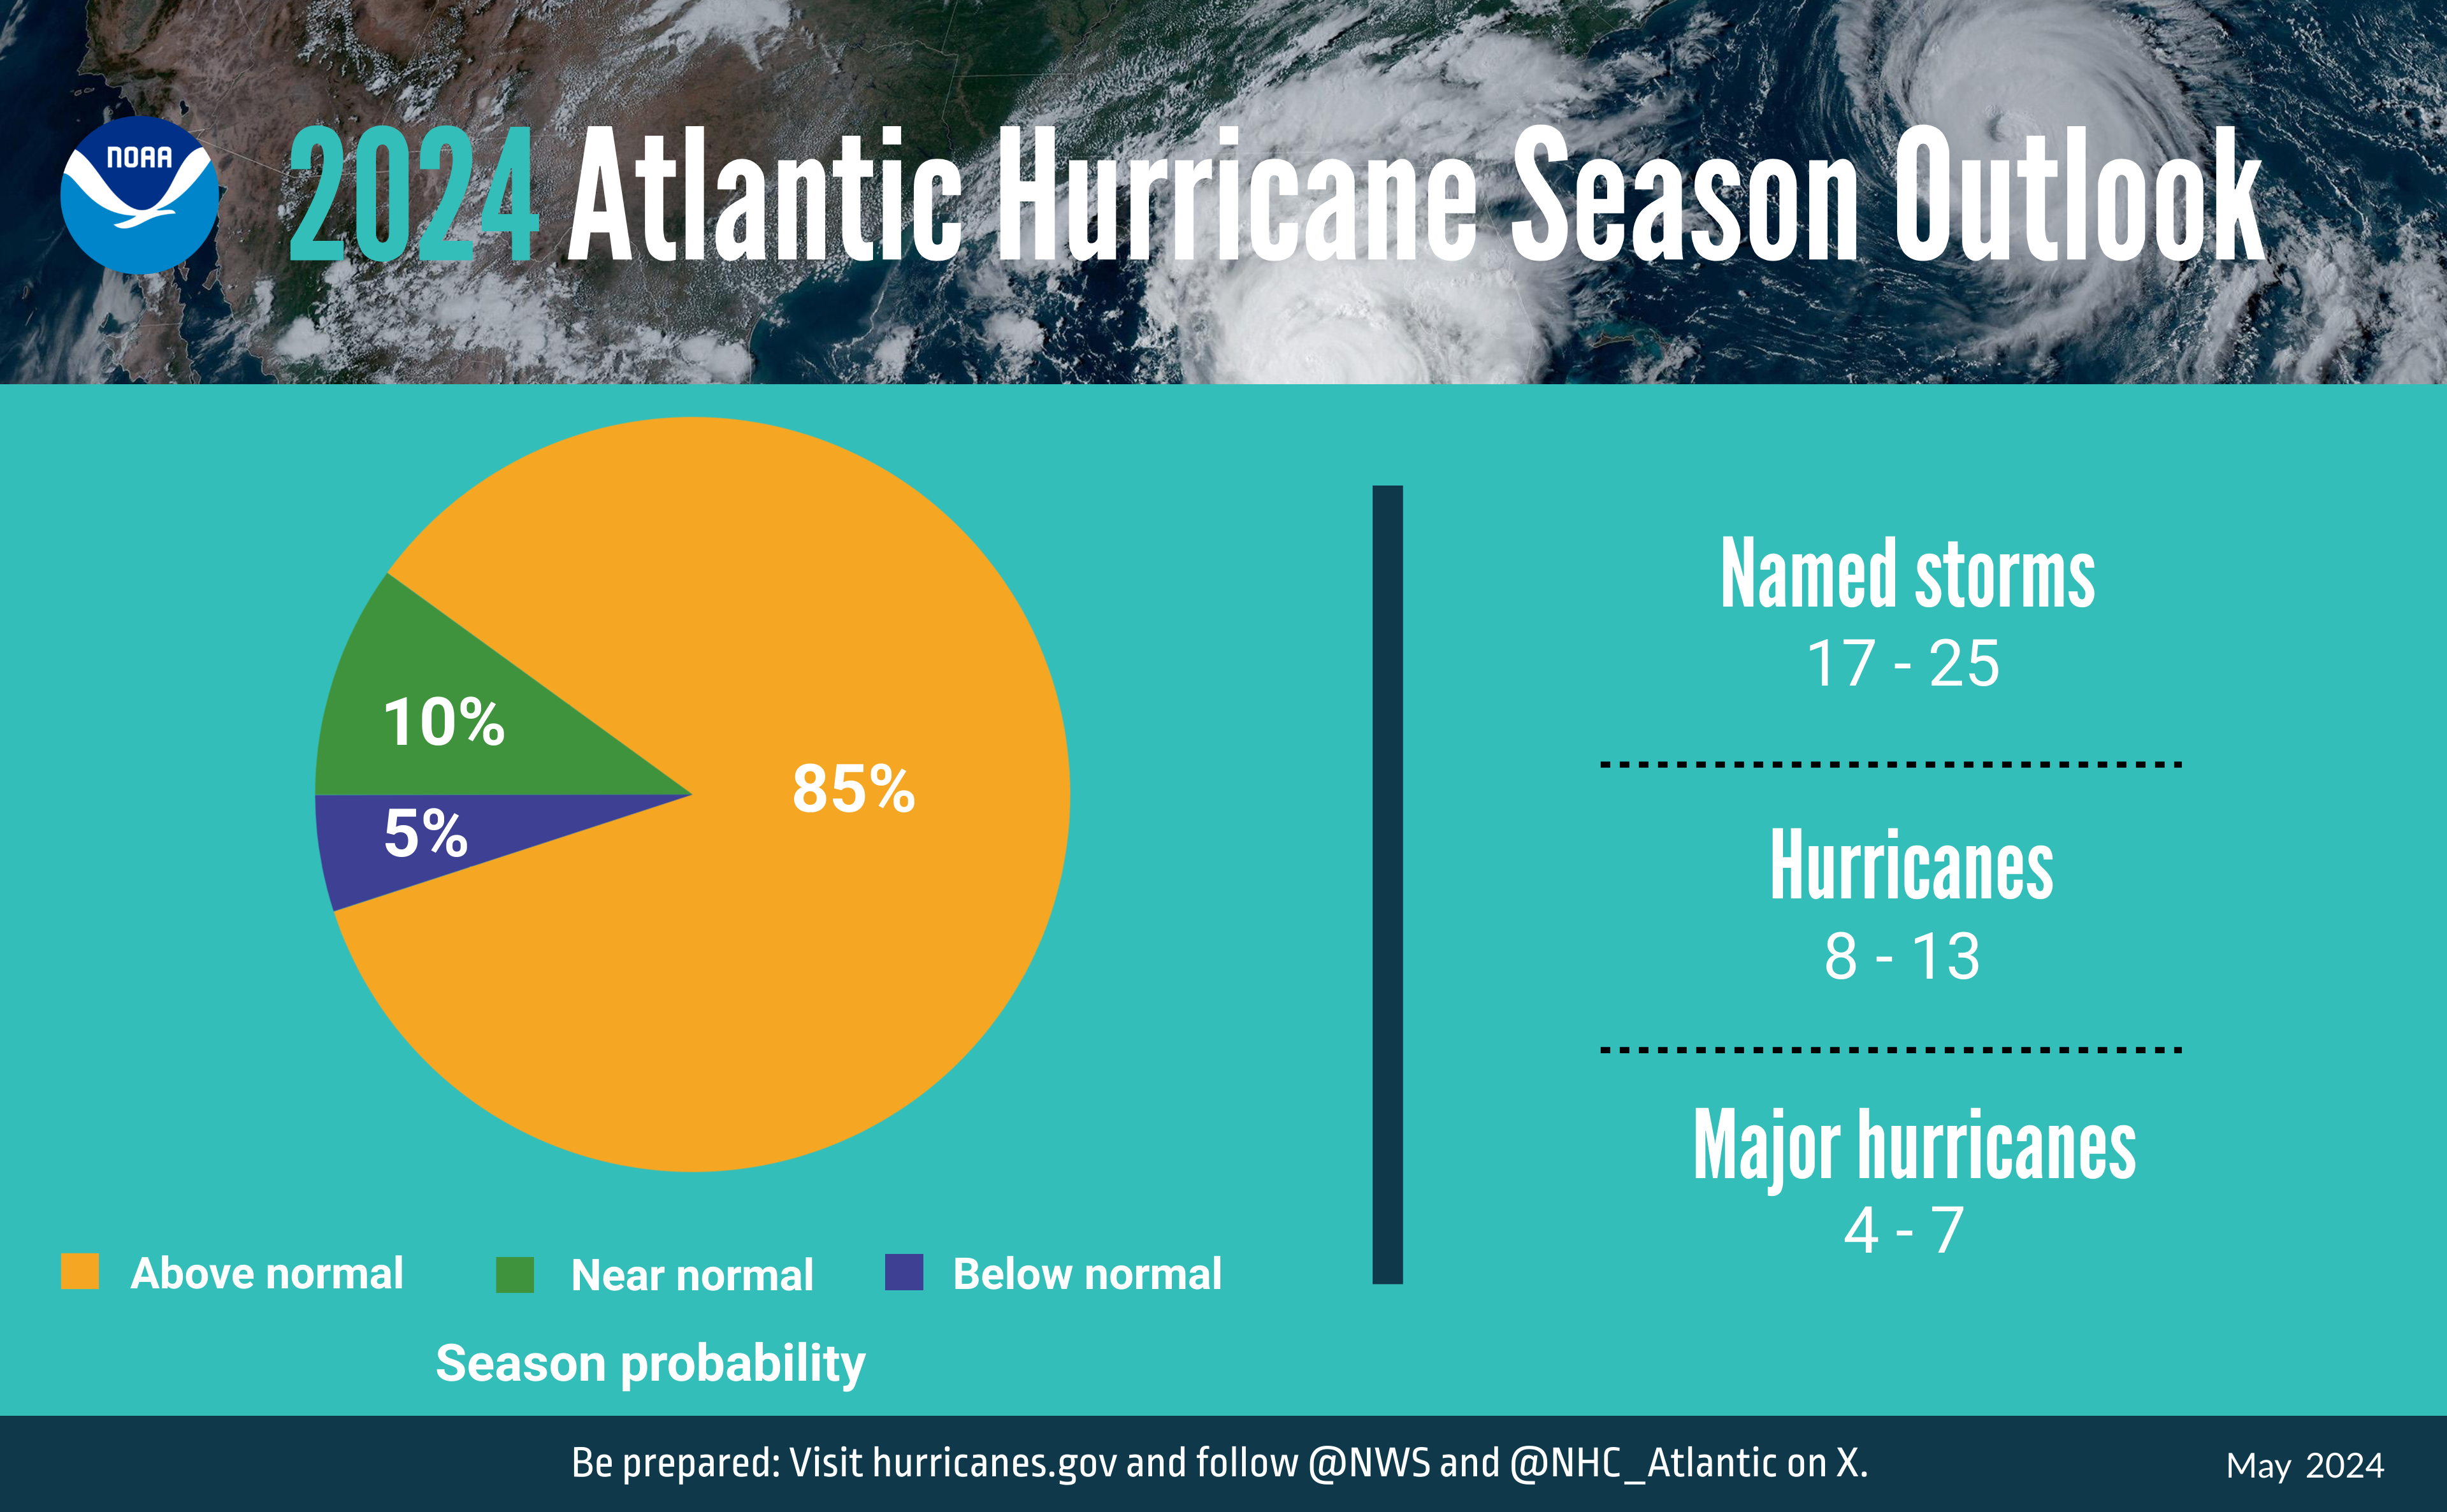 A summary infographic showing hurricane season probability and numbers of named storms predicted from NOAA's 2024 Atlantic Hurricane Season Outlook.